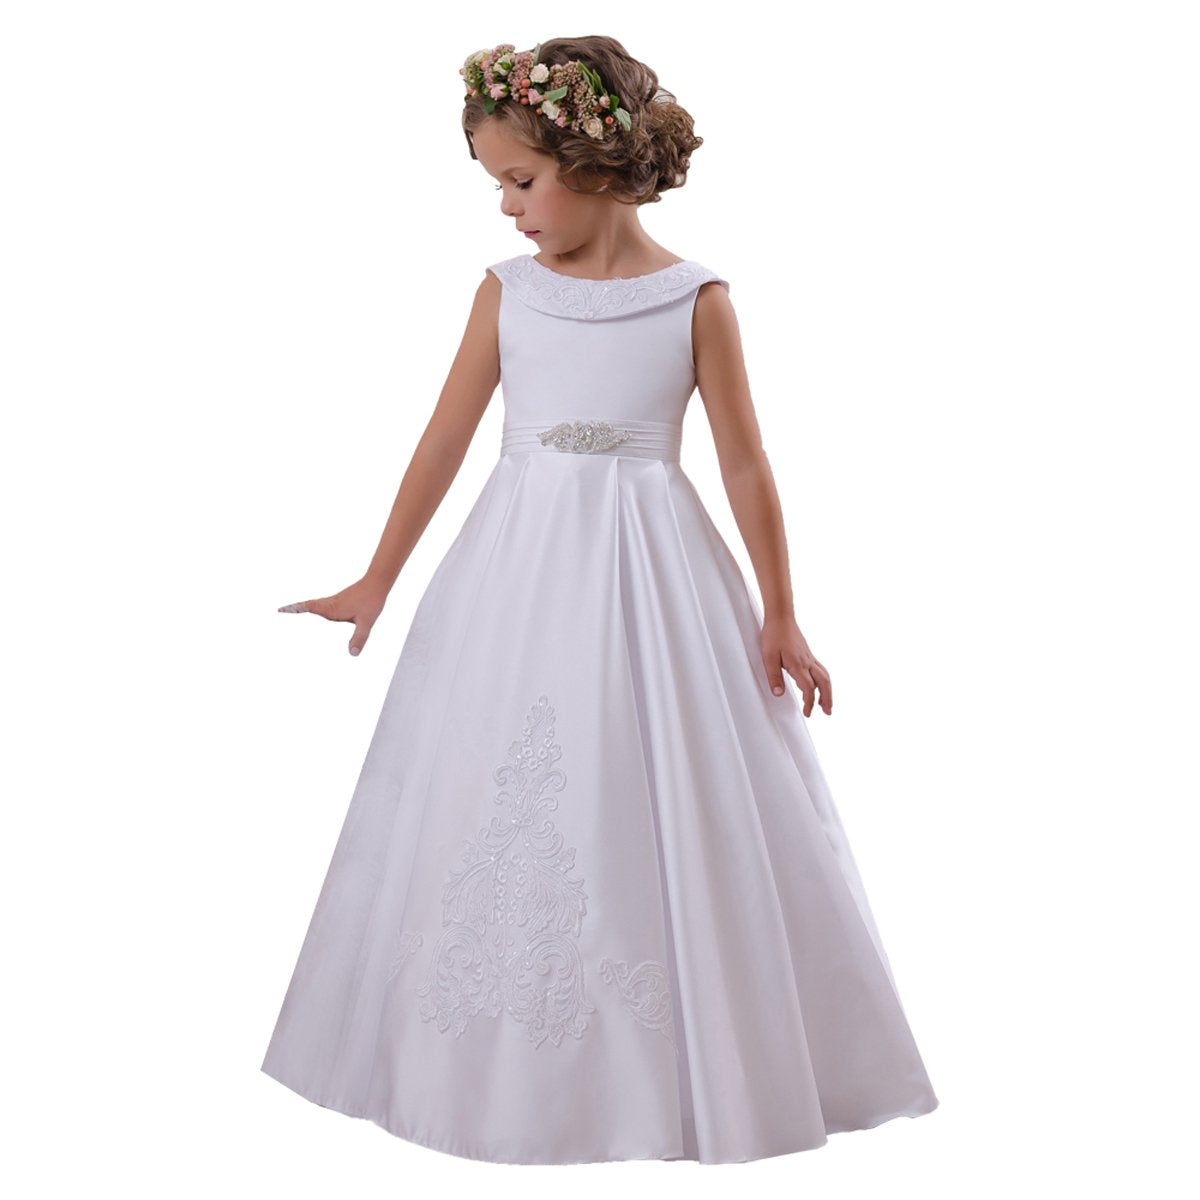 Image of Dress for 12-14 year-old girl, dress for 10-12 year-old girl,